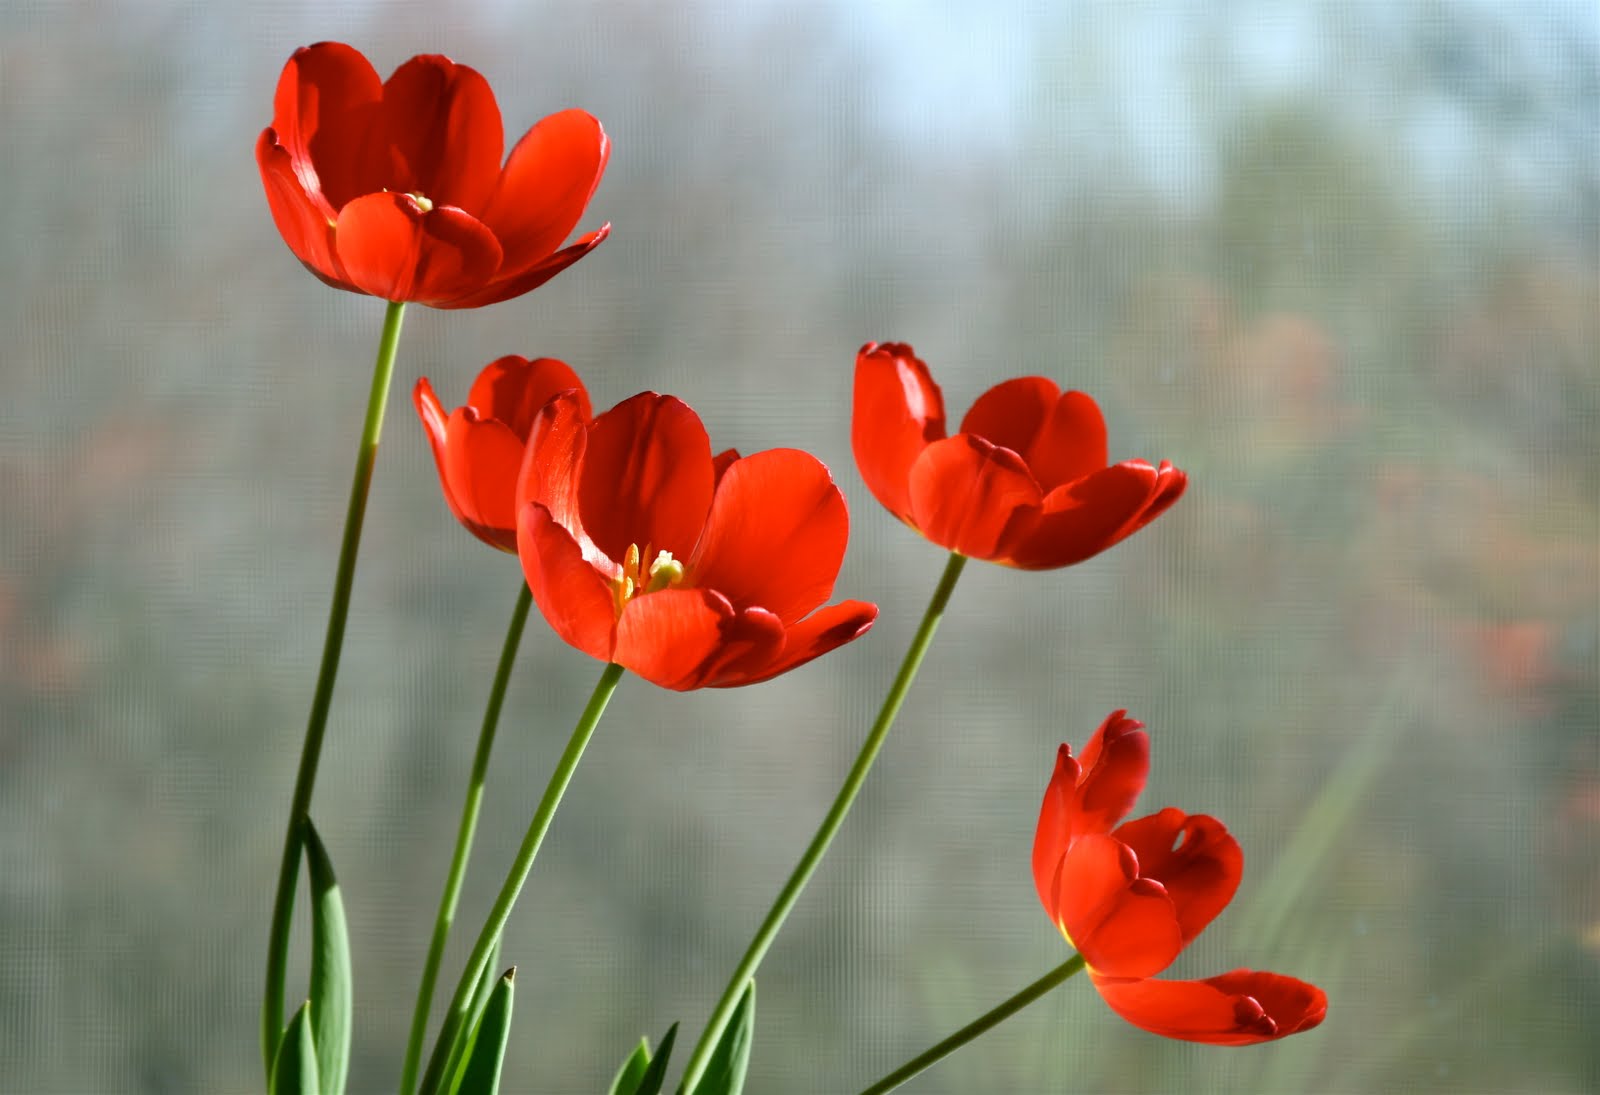 Tulips Flowers Wallpaper Image Pictures